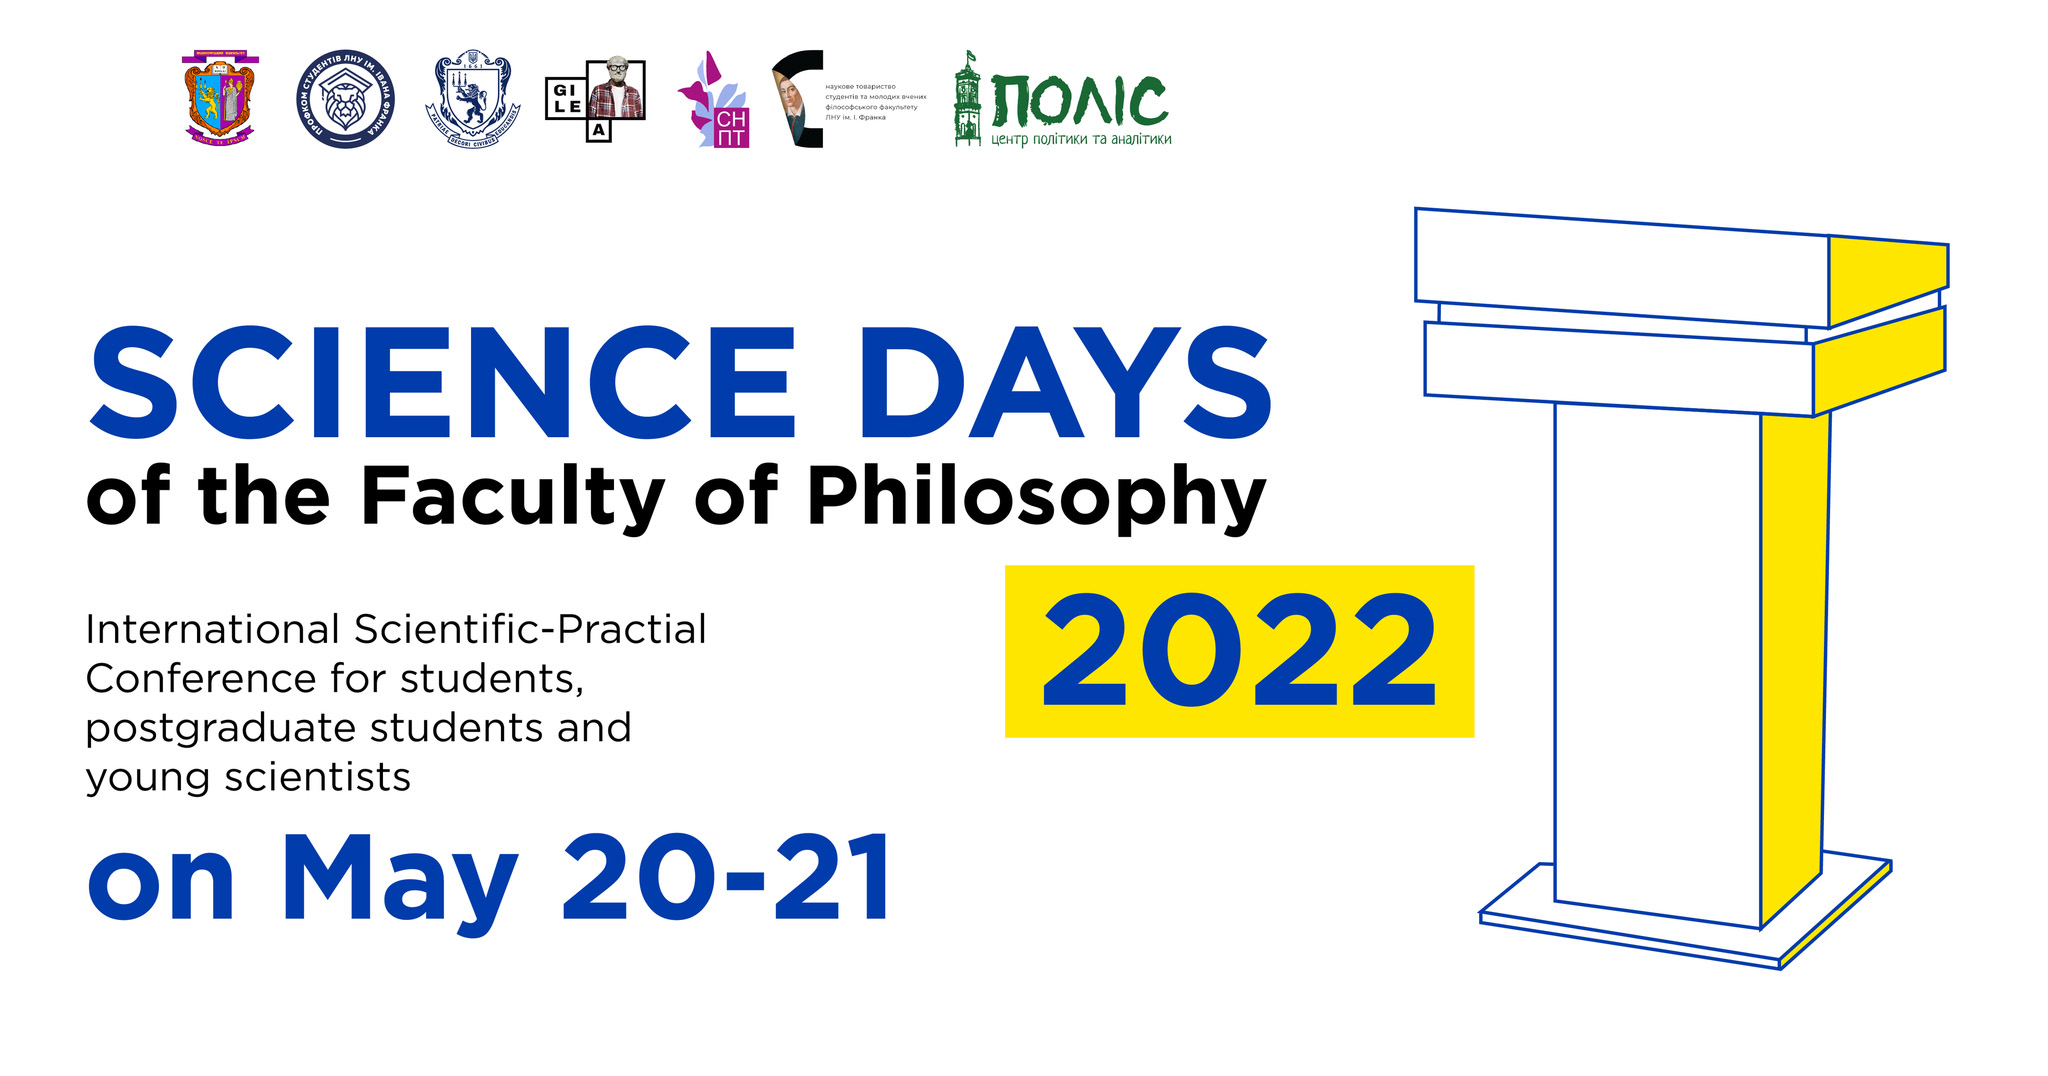 Science Days of the Faculty of Philosophy 2022